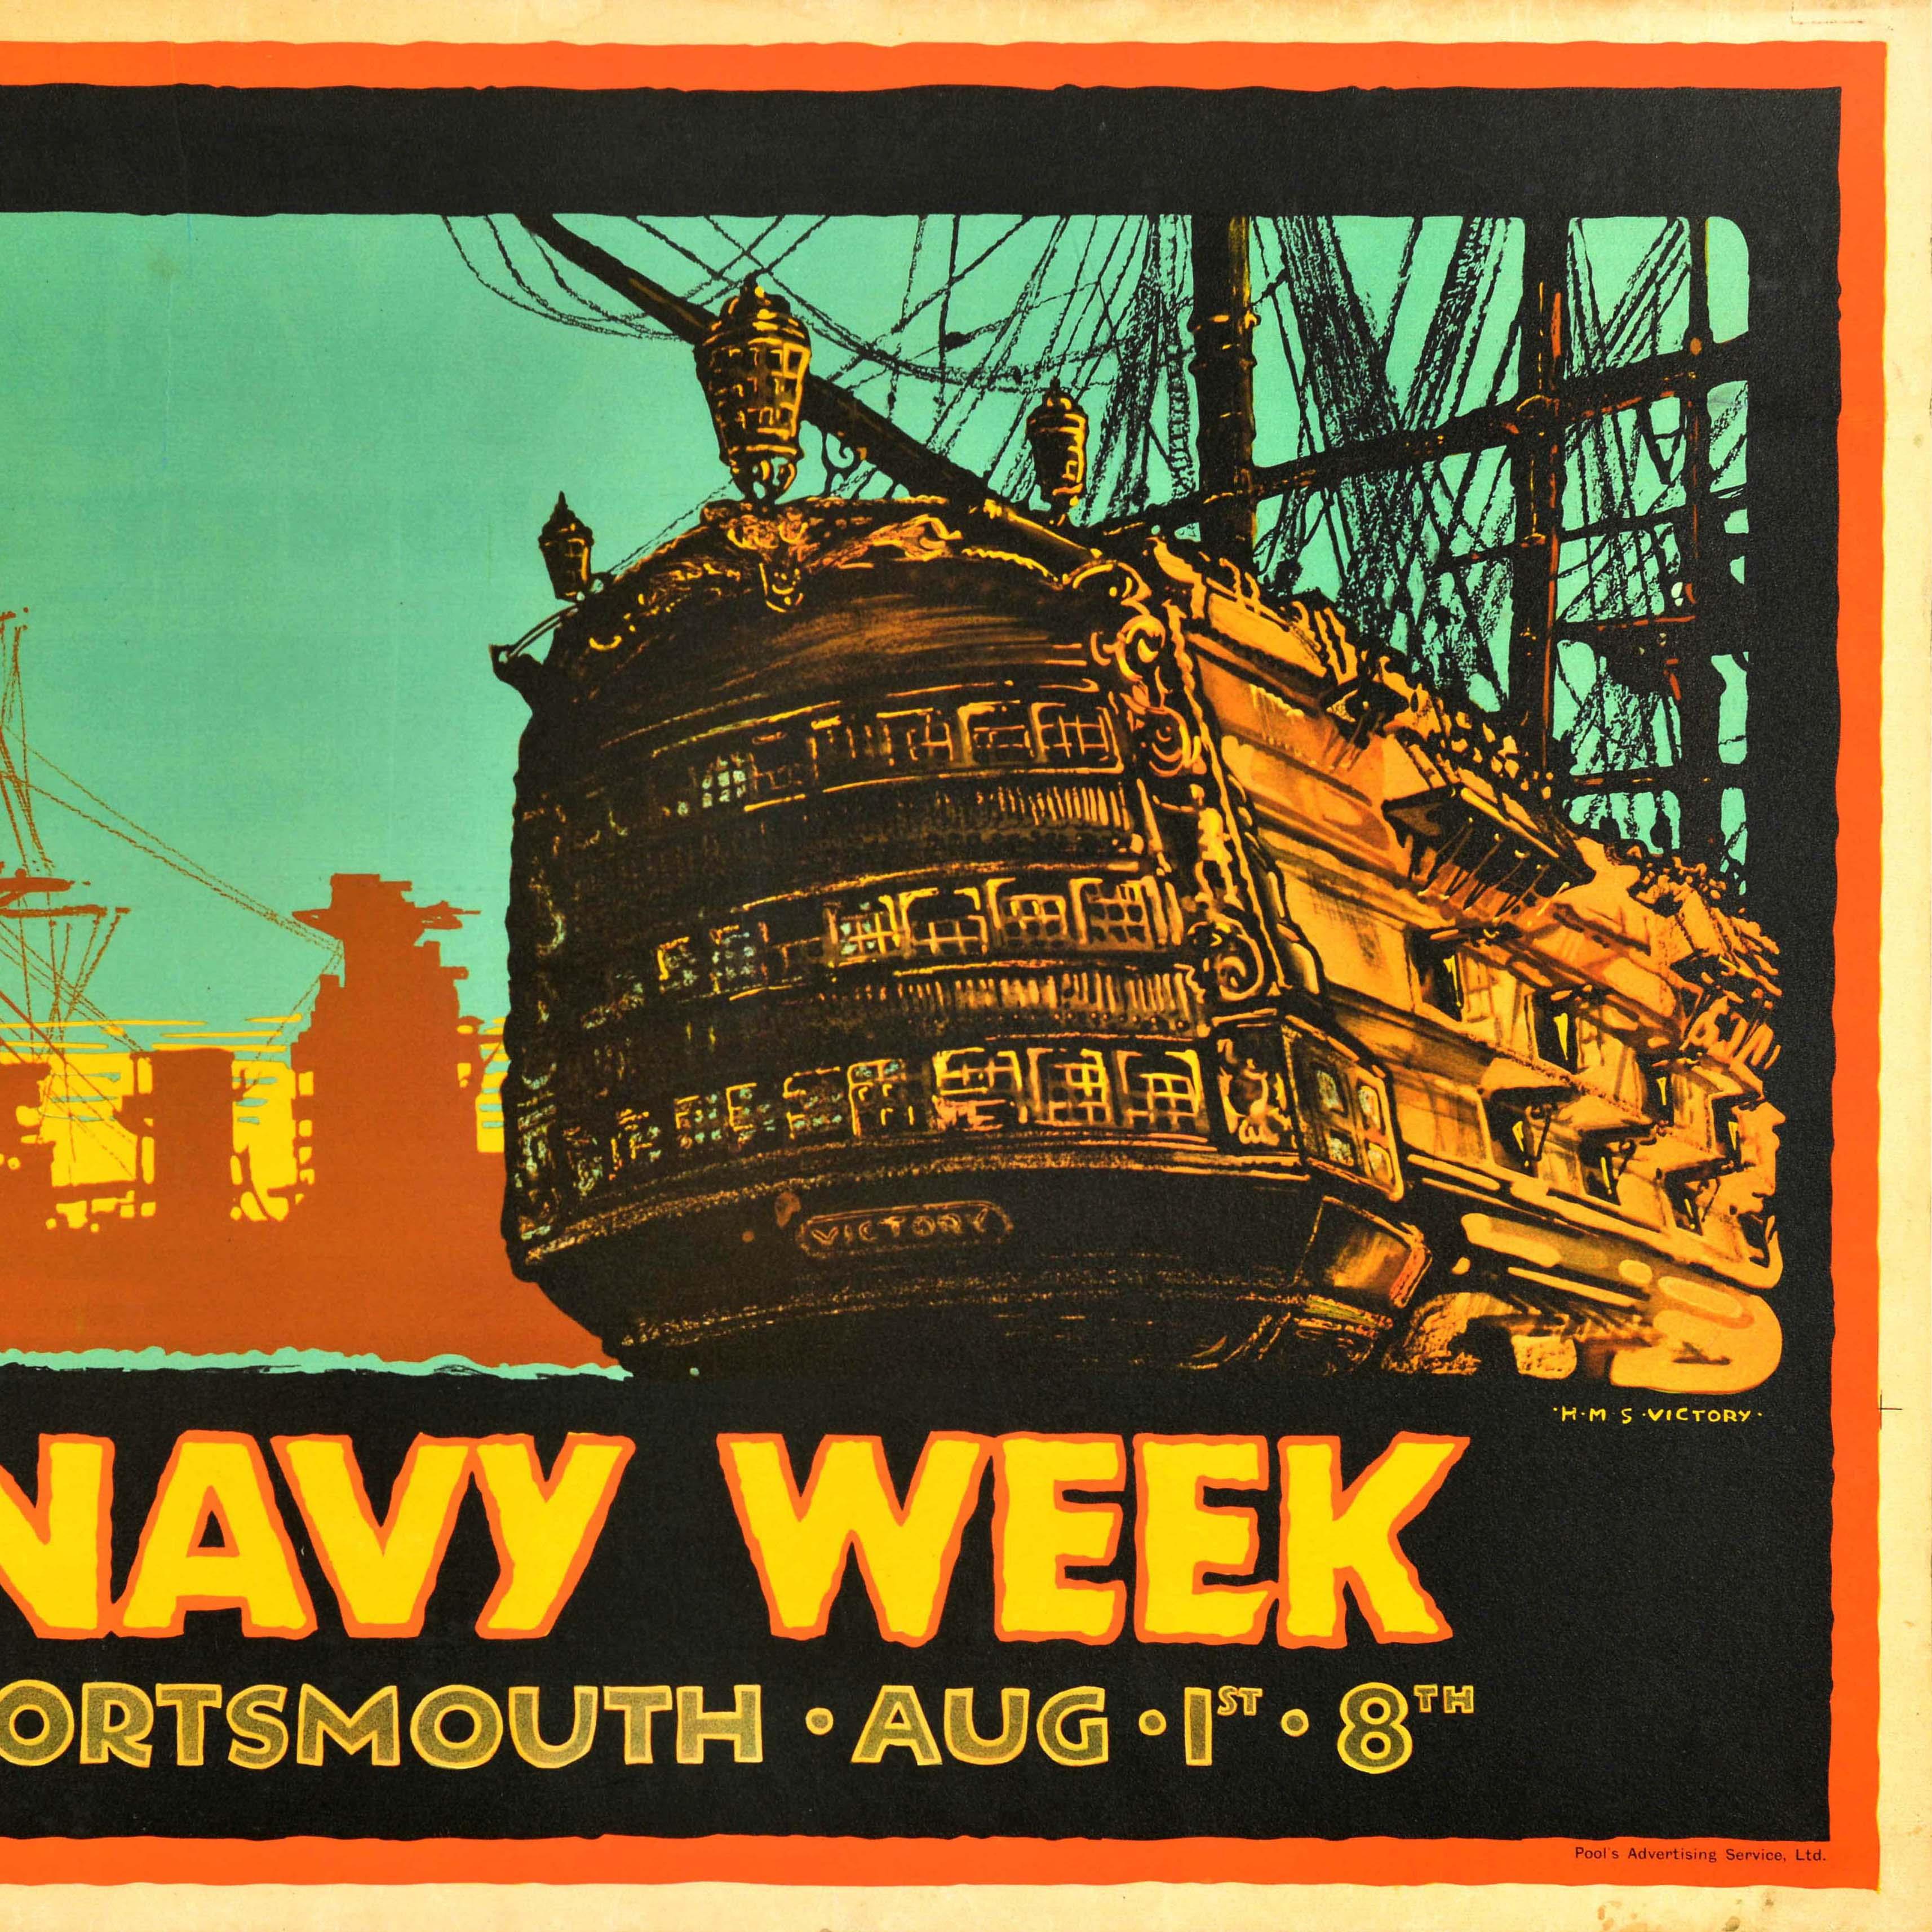 Original Vintage Advertising Poster Navy Week Portsmouth HMS Nelson Victory Ship For Sale 1